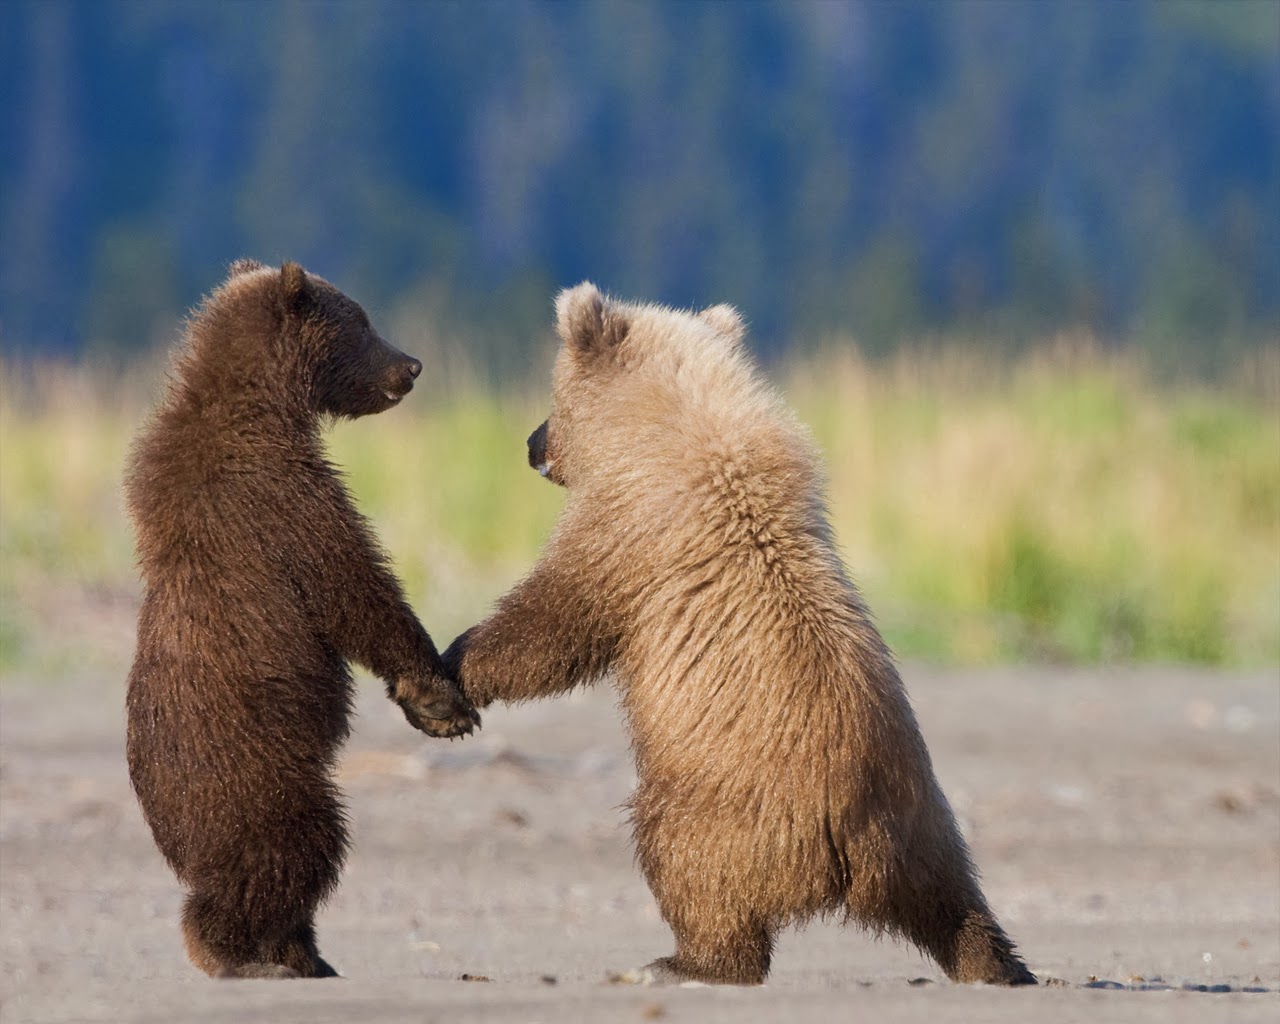 Two Brown Bear Hand Wallpaper High Quality